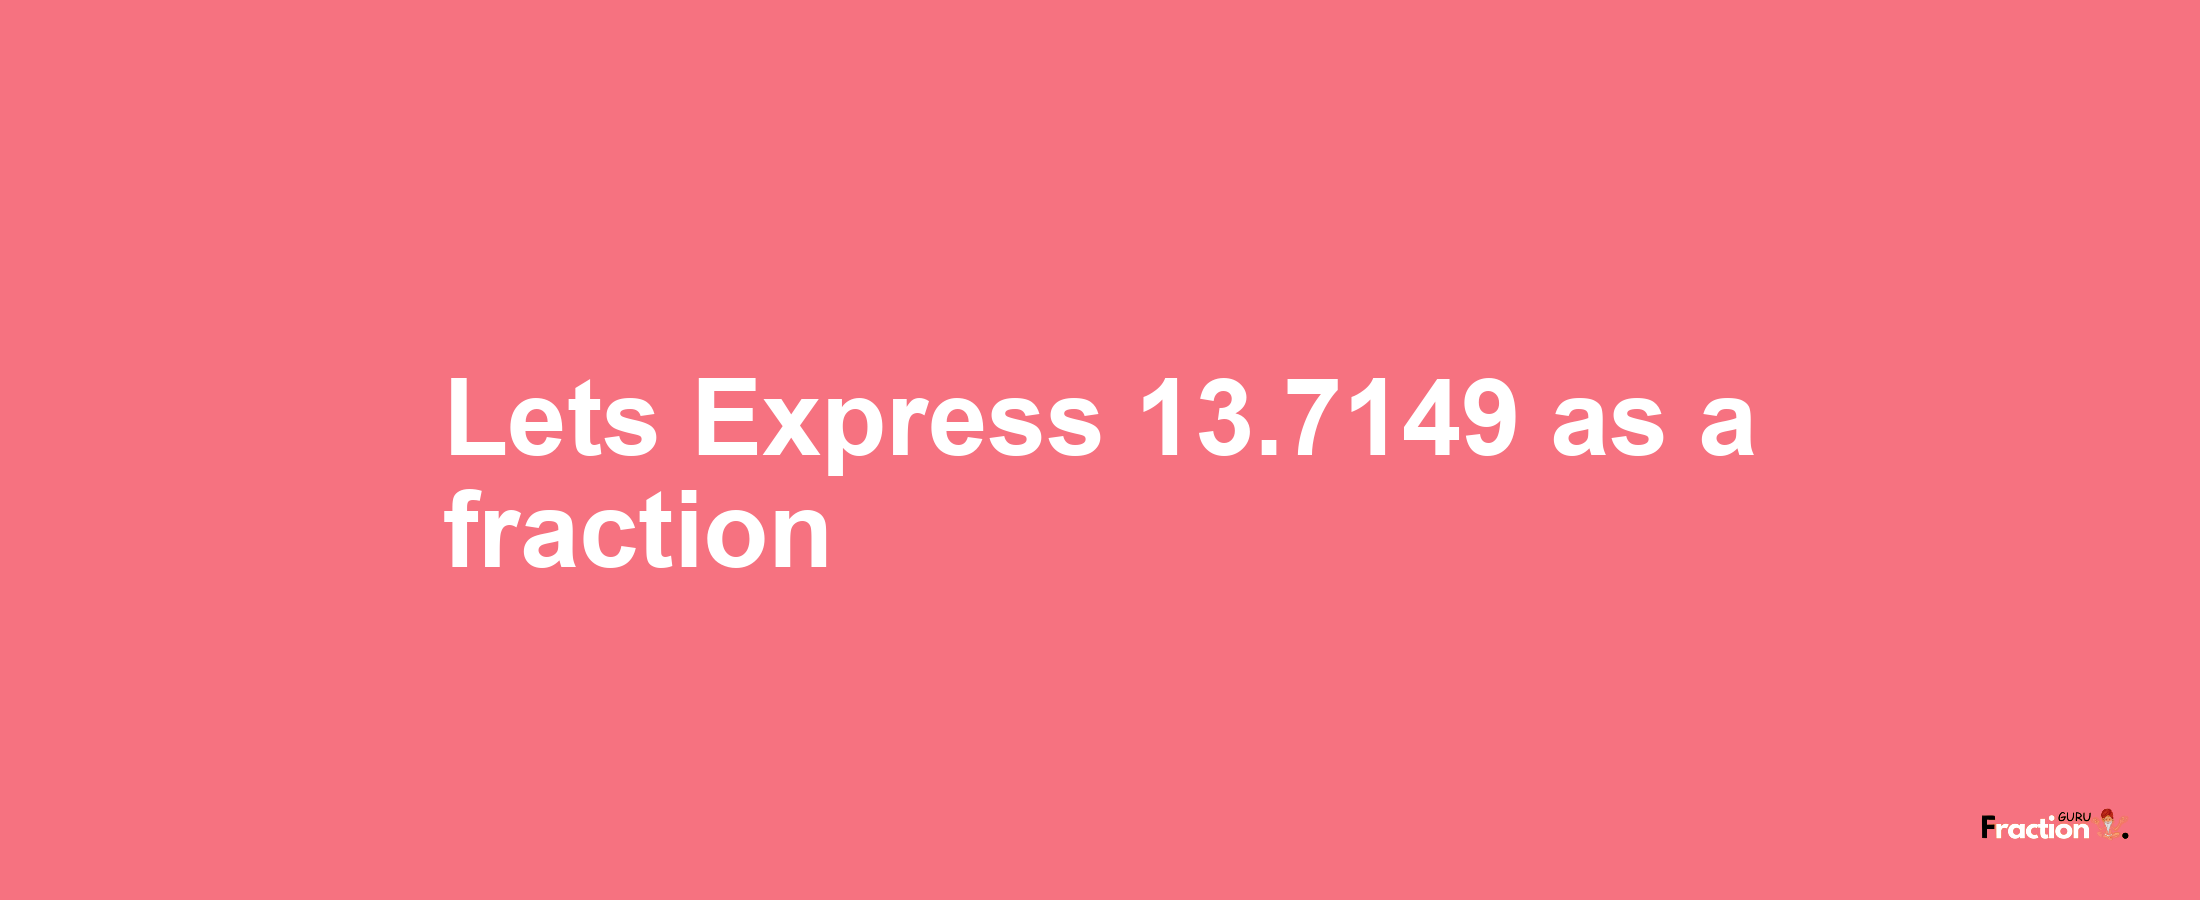 Lets Express 13.7149 as afraction